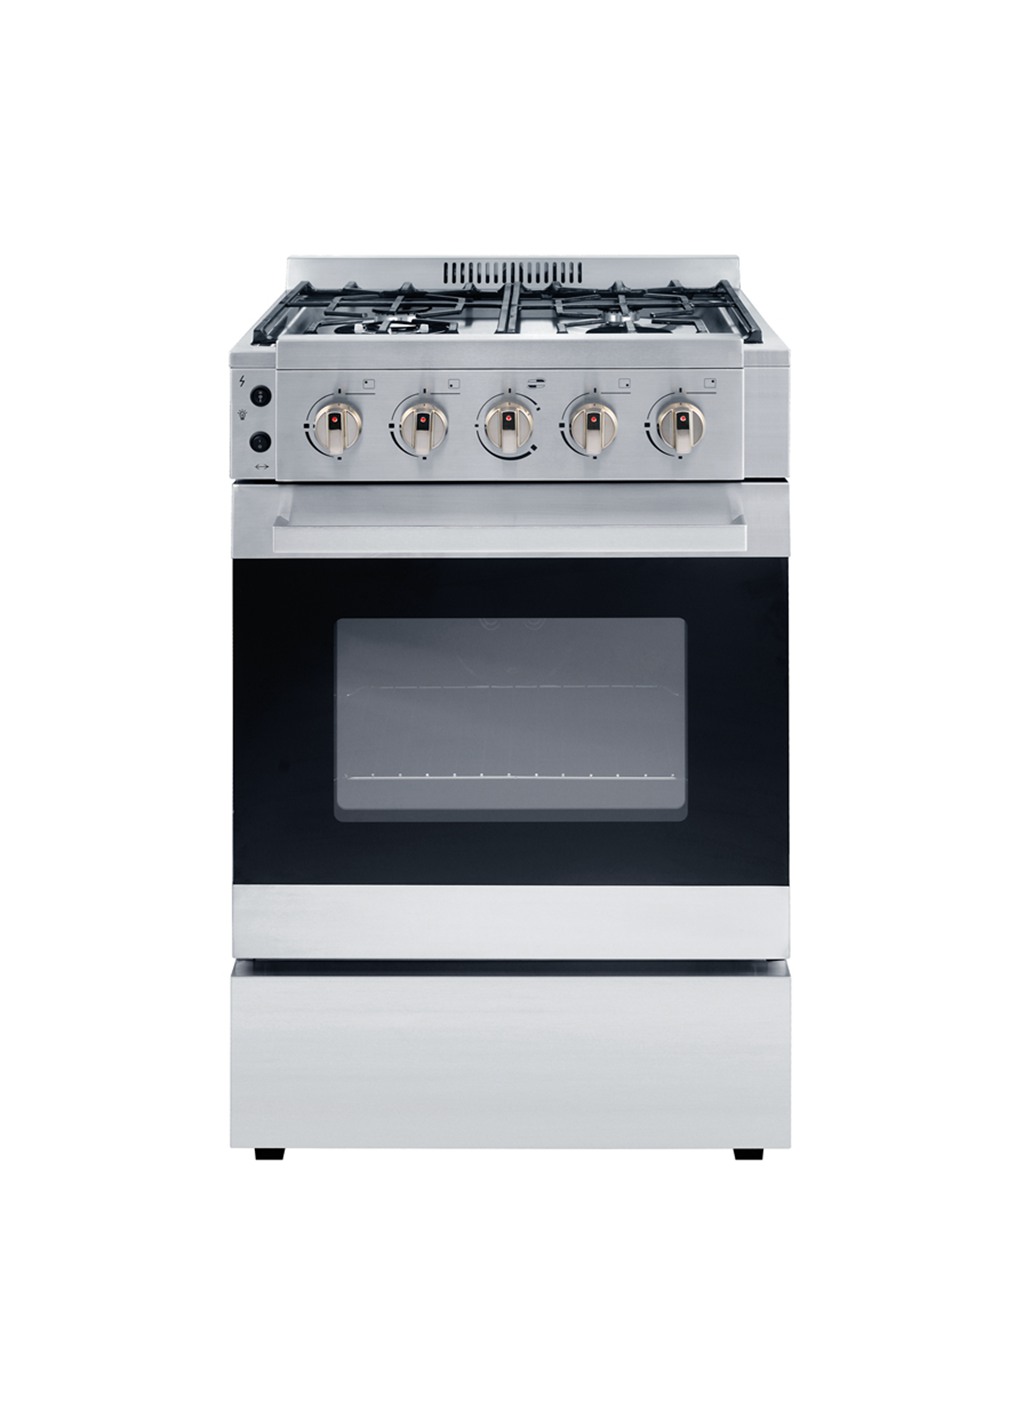 4 Burnners Freestanding Single Gas Oven with Electric Oven